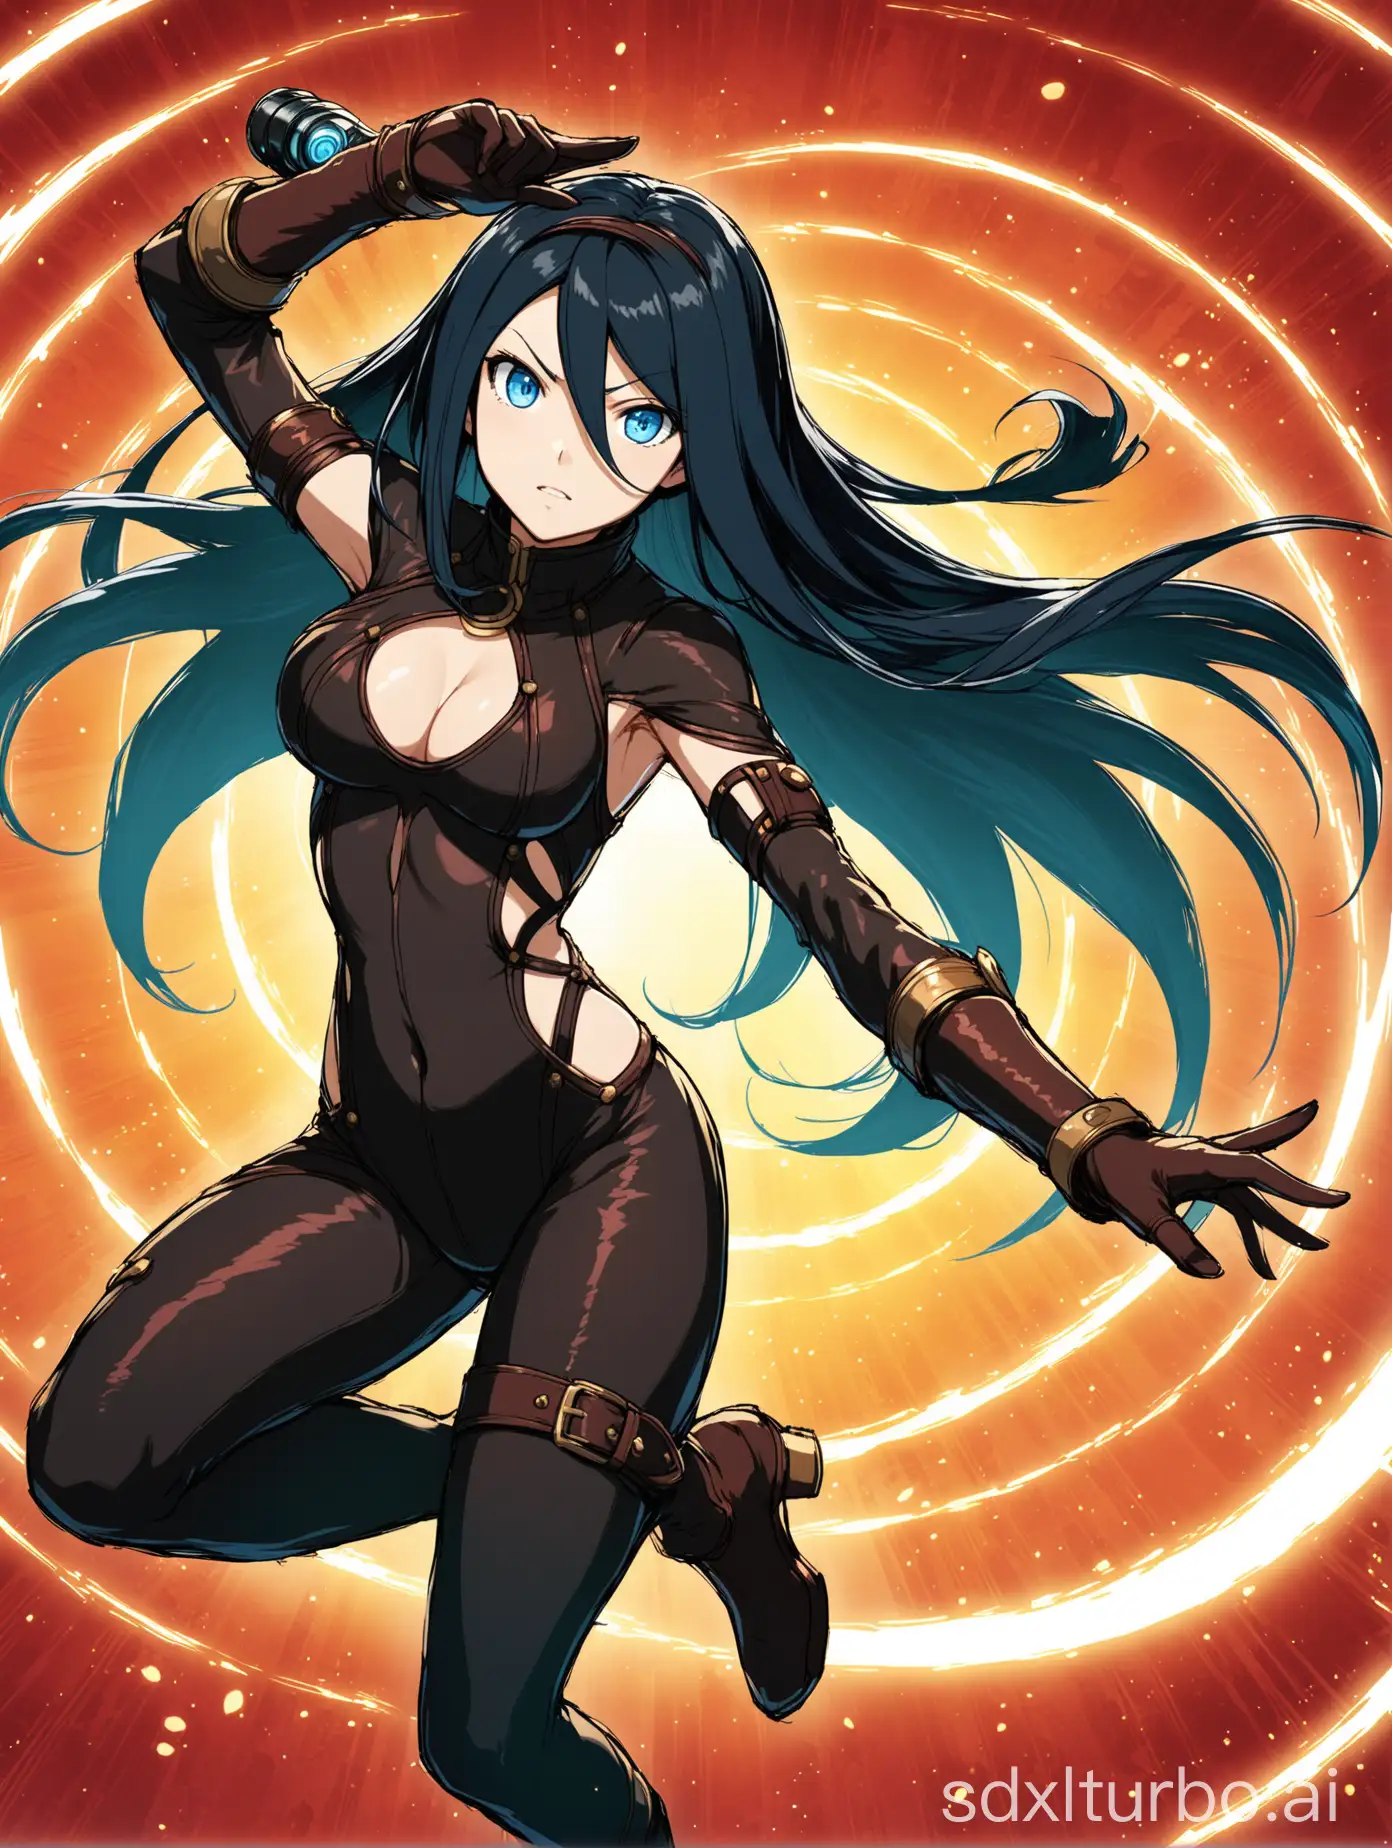 raven from gravity rush 2 ark of time, black long hair with red  strands, blue eyes, cat suit with cut-outs, in action pose